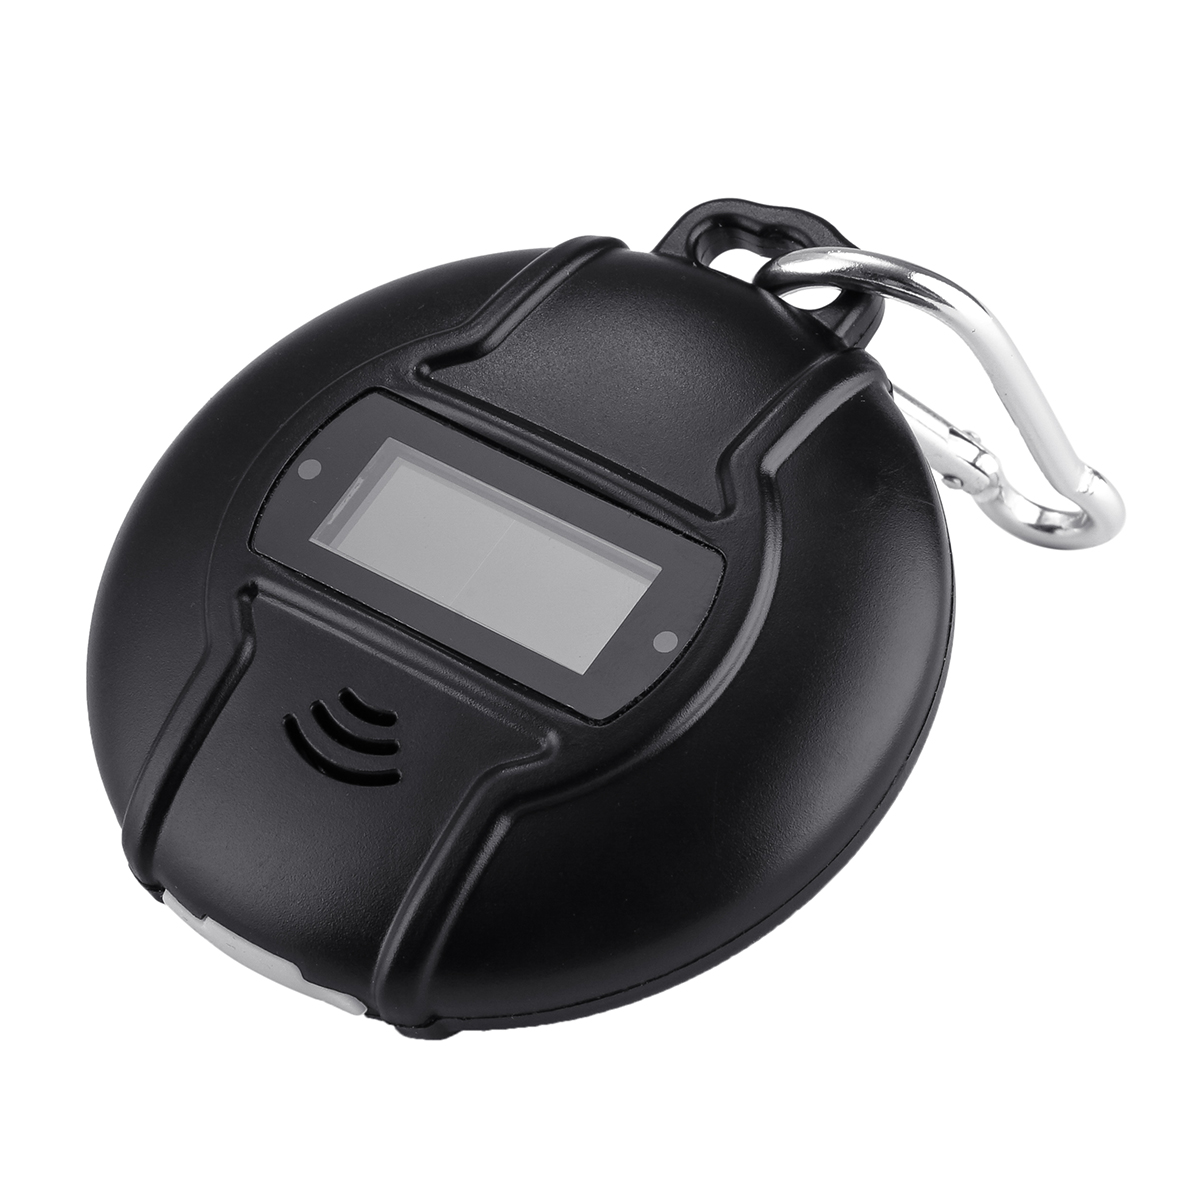 Solar Drive Mouse Portable Compass Ultrasonic Multifunction Electronic Mosquito 